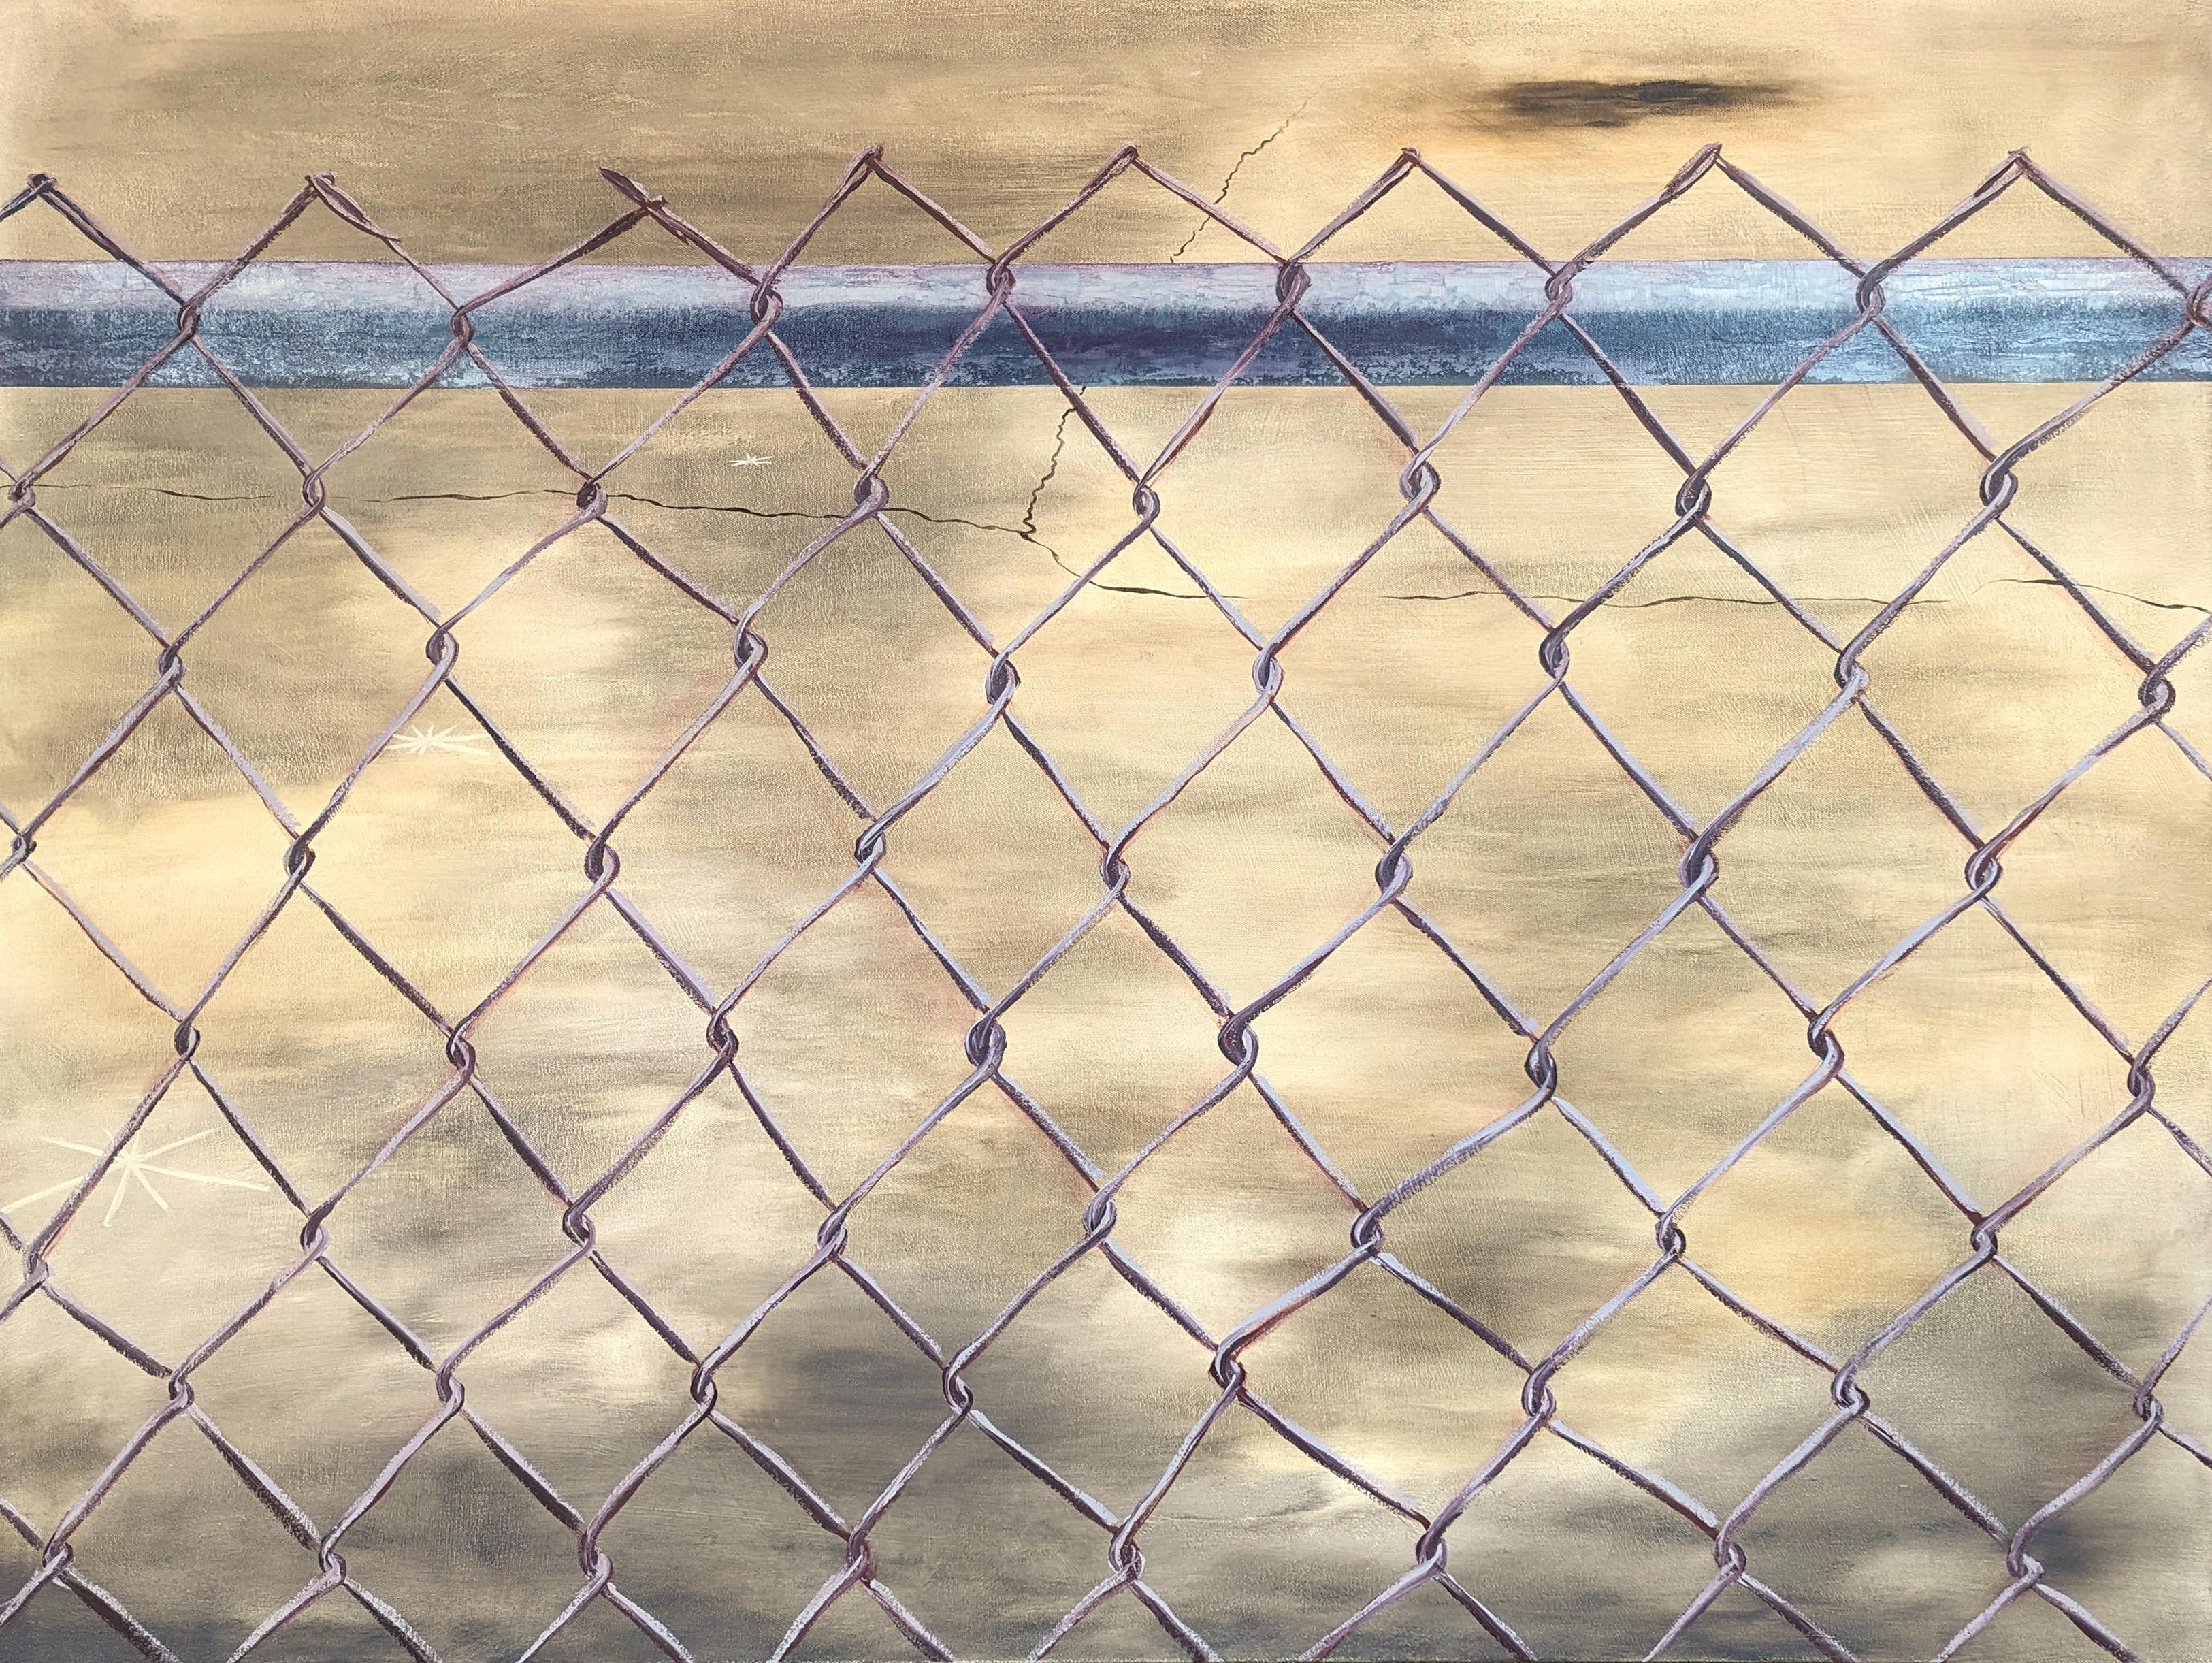 Tommy Taylor Landscape Painting - "Heights" Contemporary Neutral Toned Realistic Close Up of Chain Link Fence